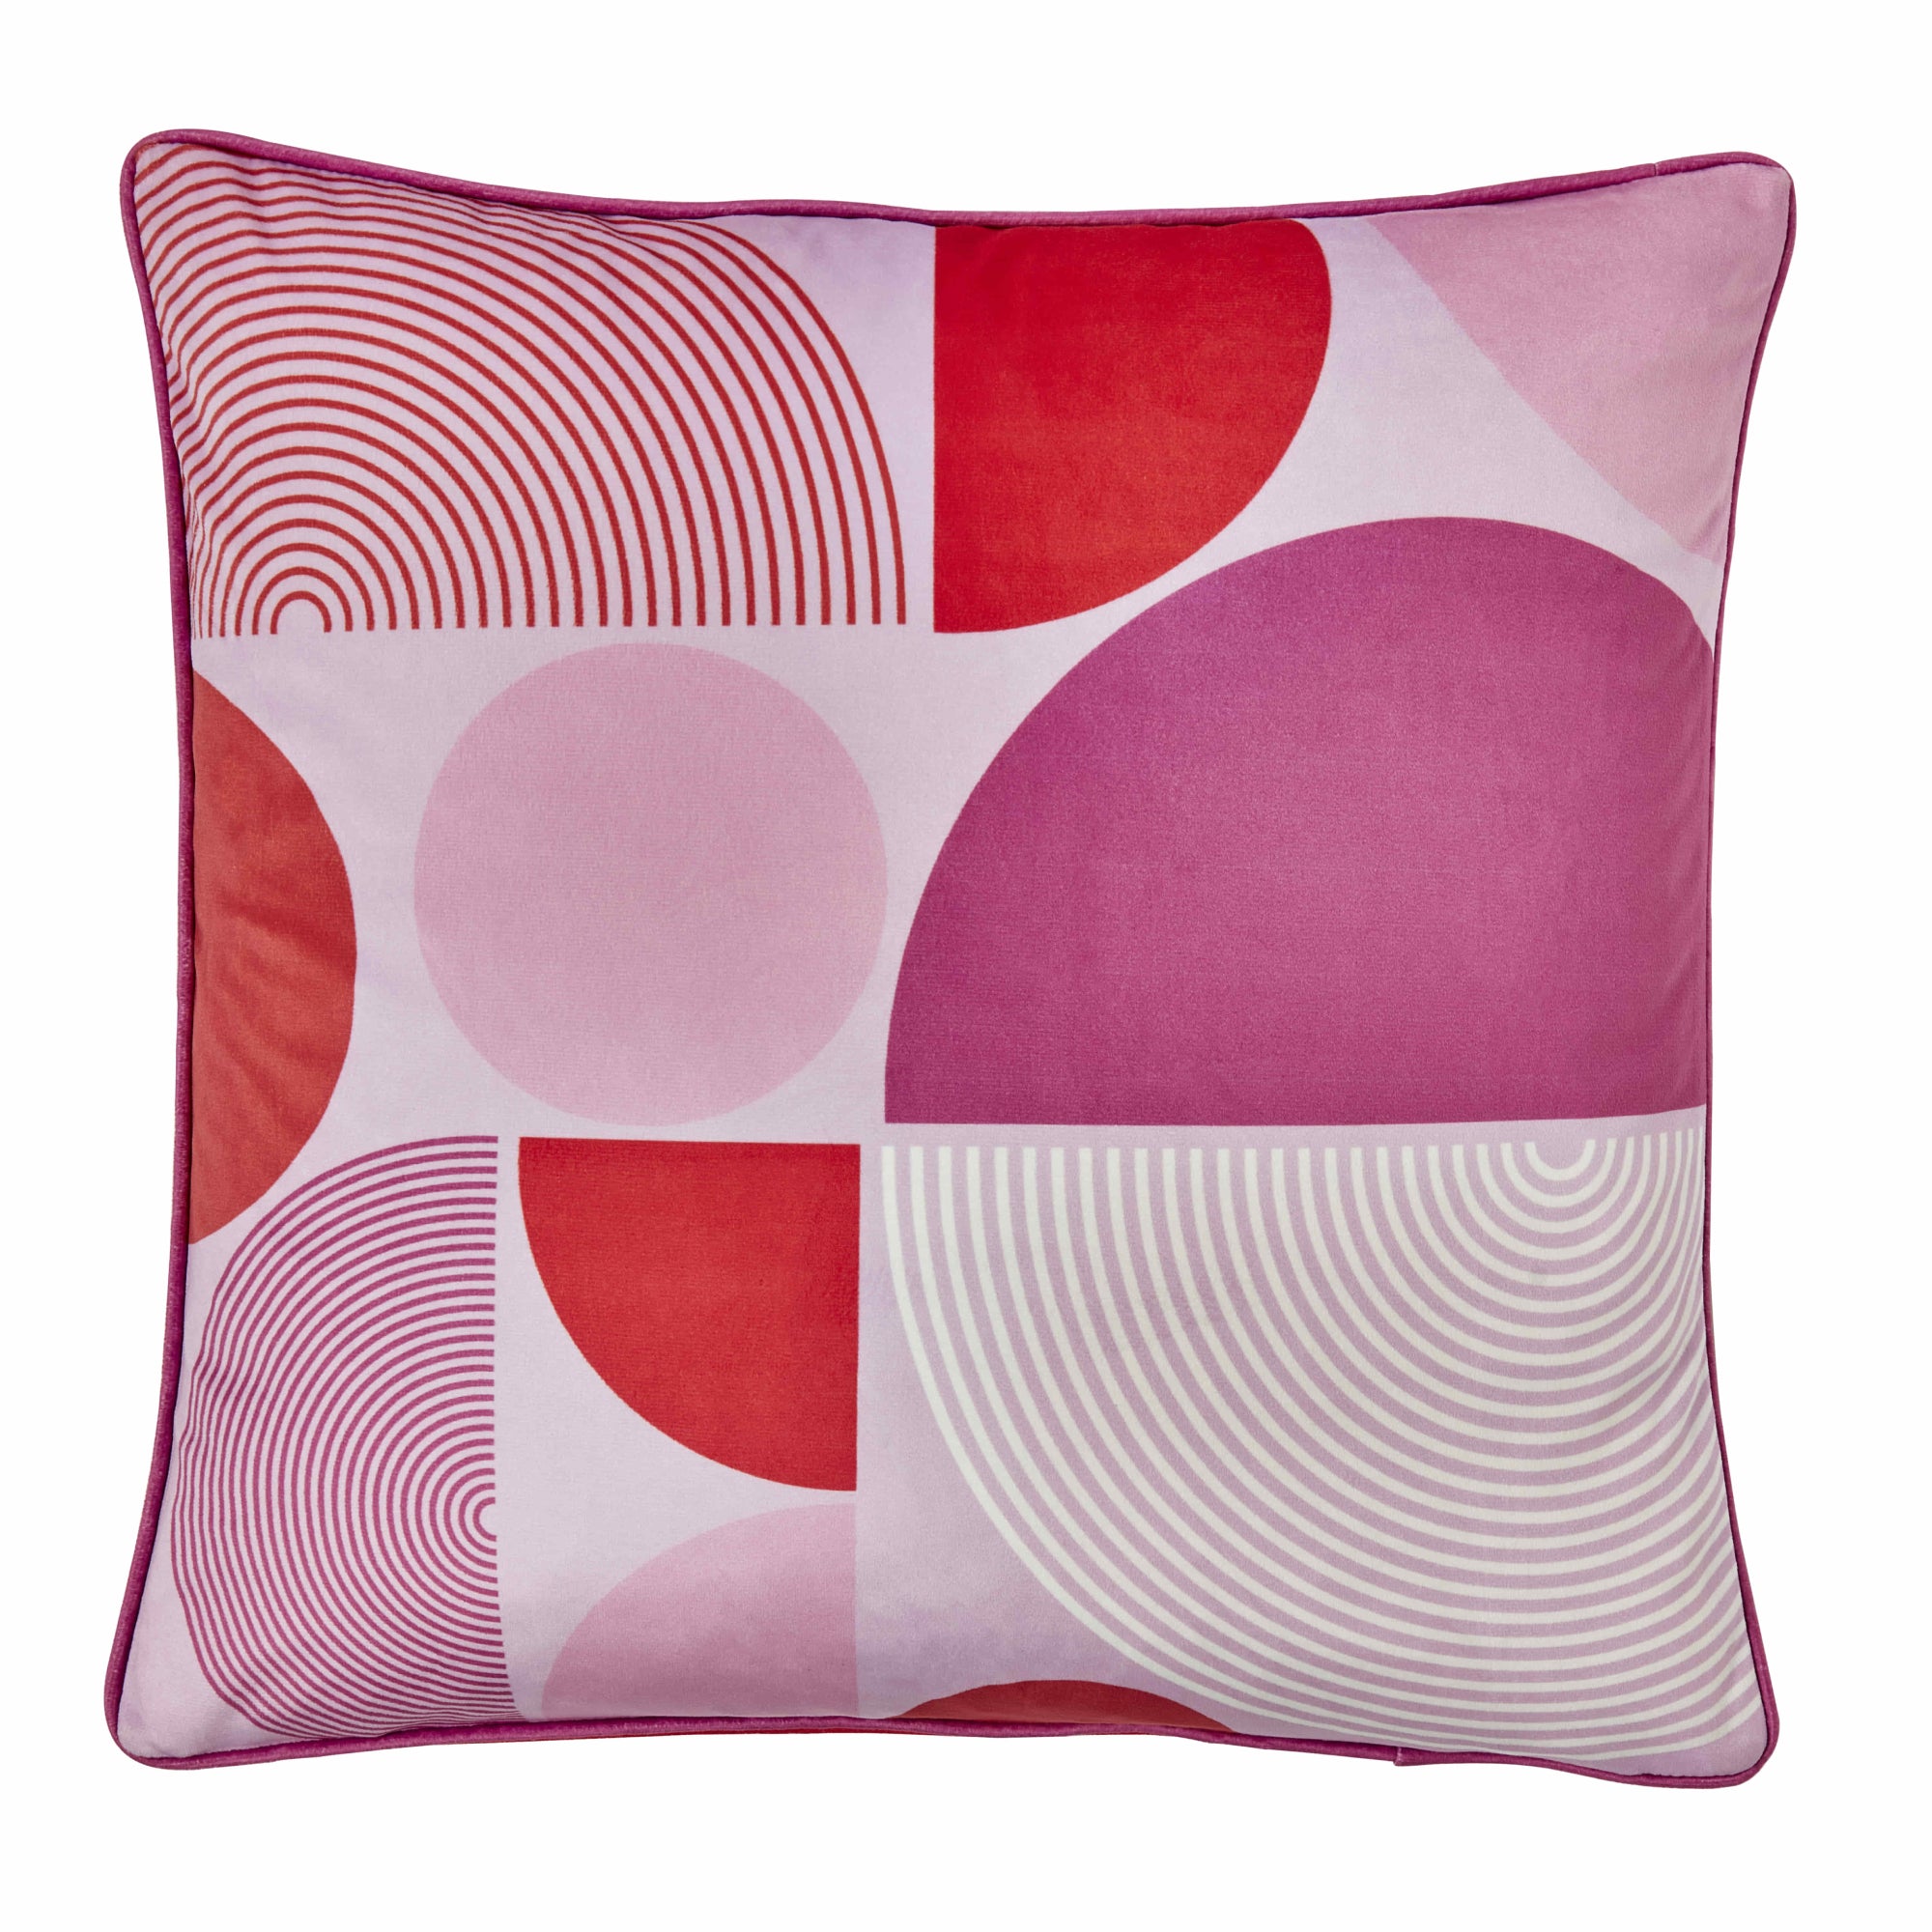 Filled Cushion Ingo by Fusion in Pink